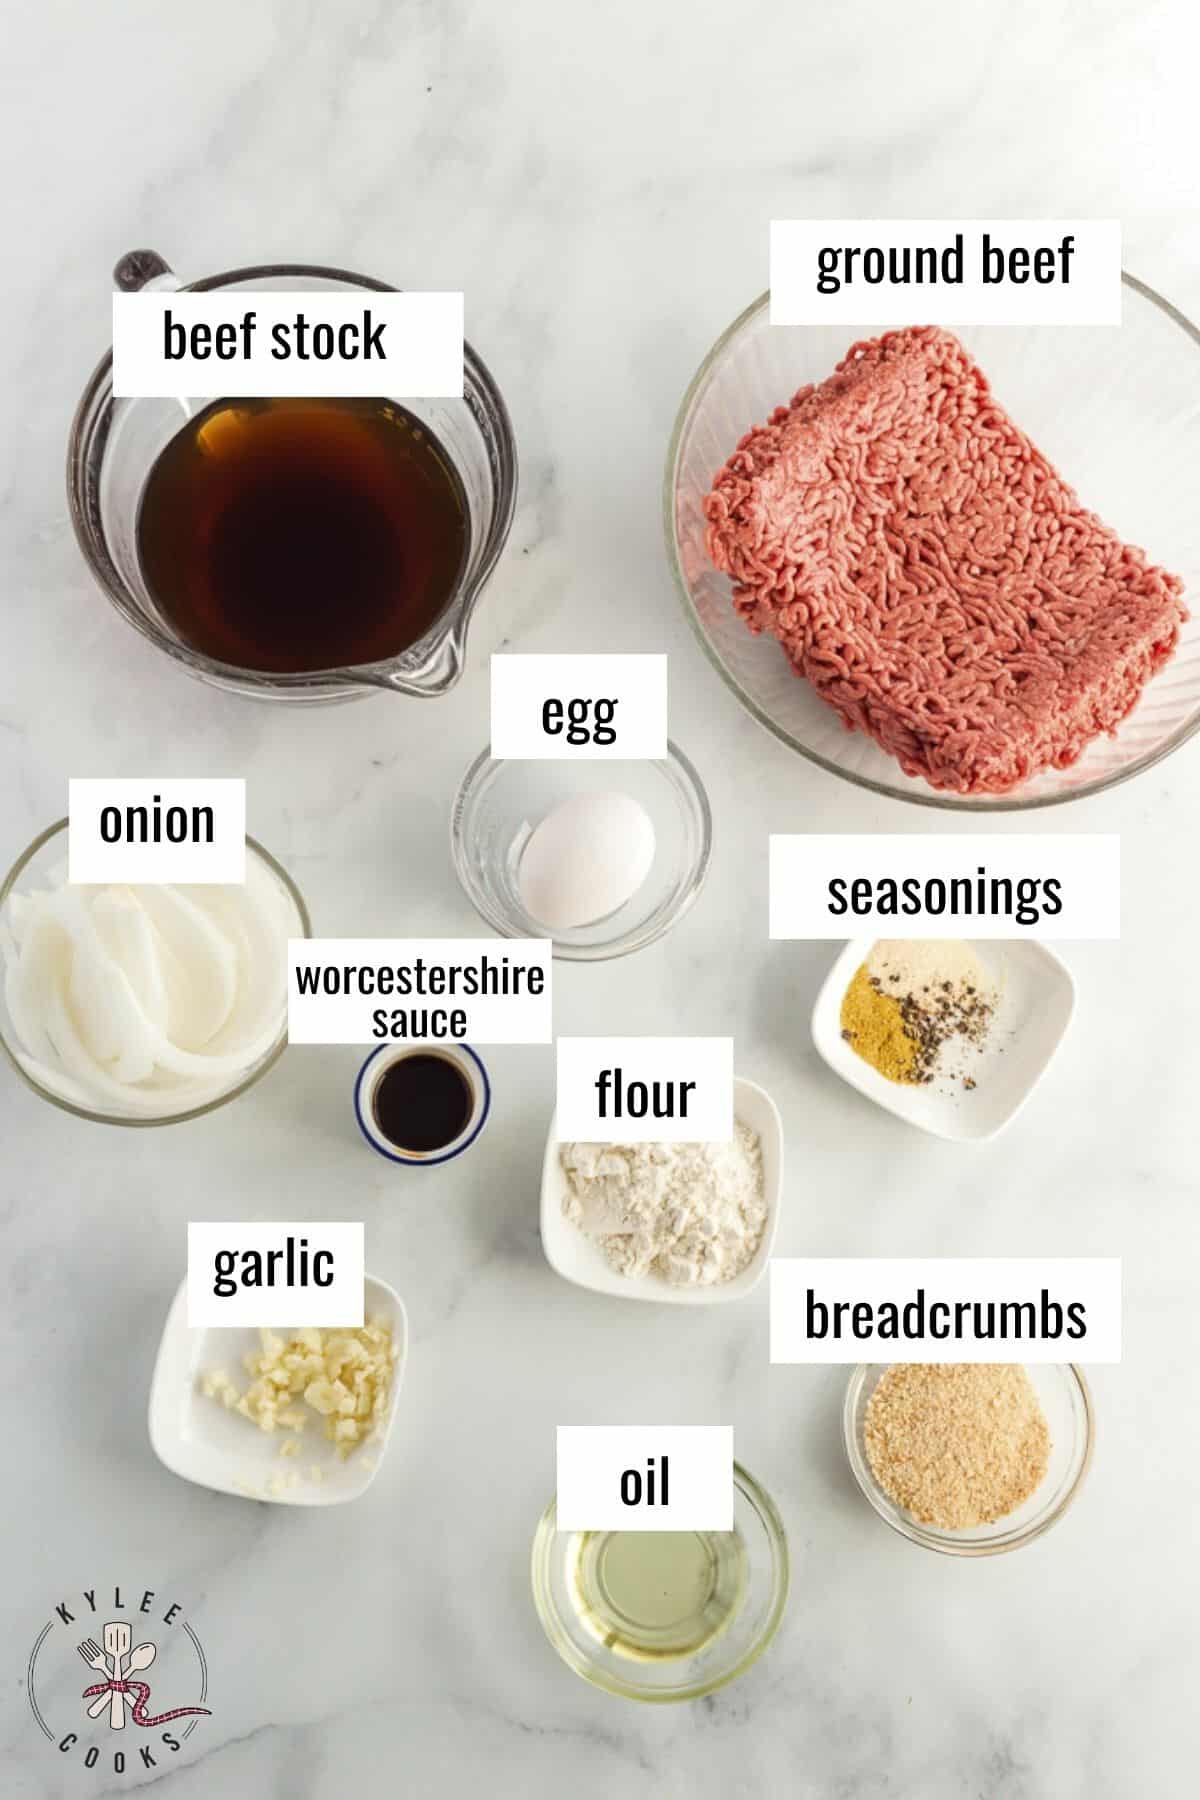 ingredients for hamburger steaks laid out and labeled